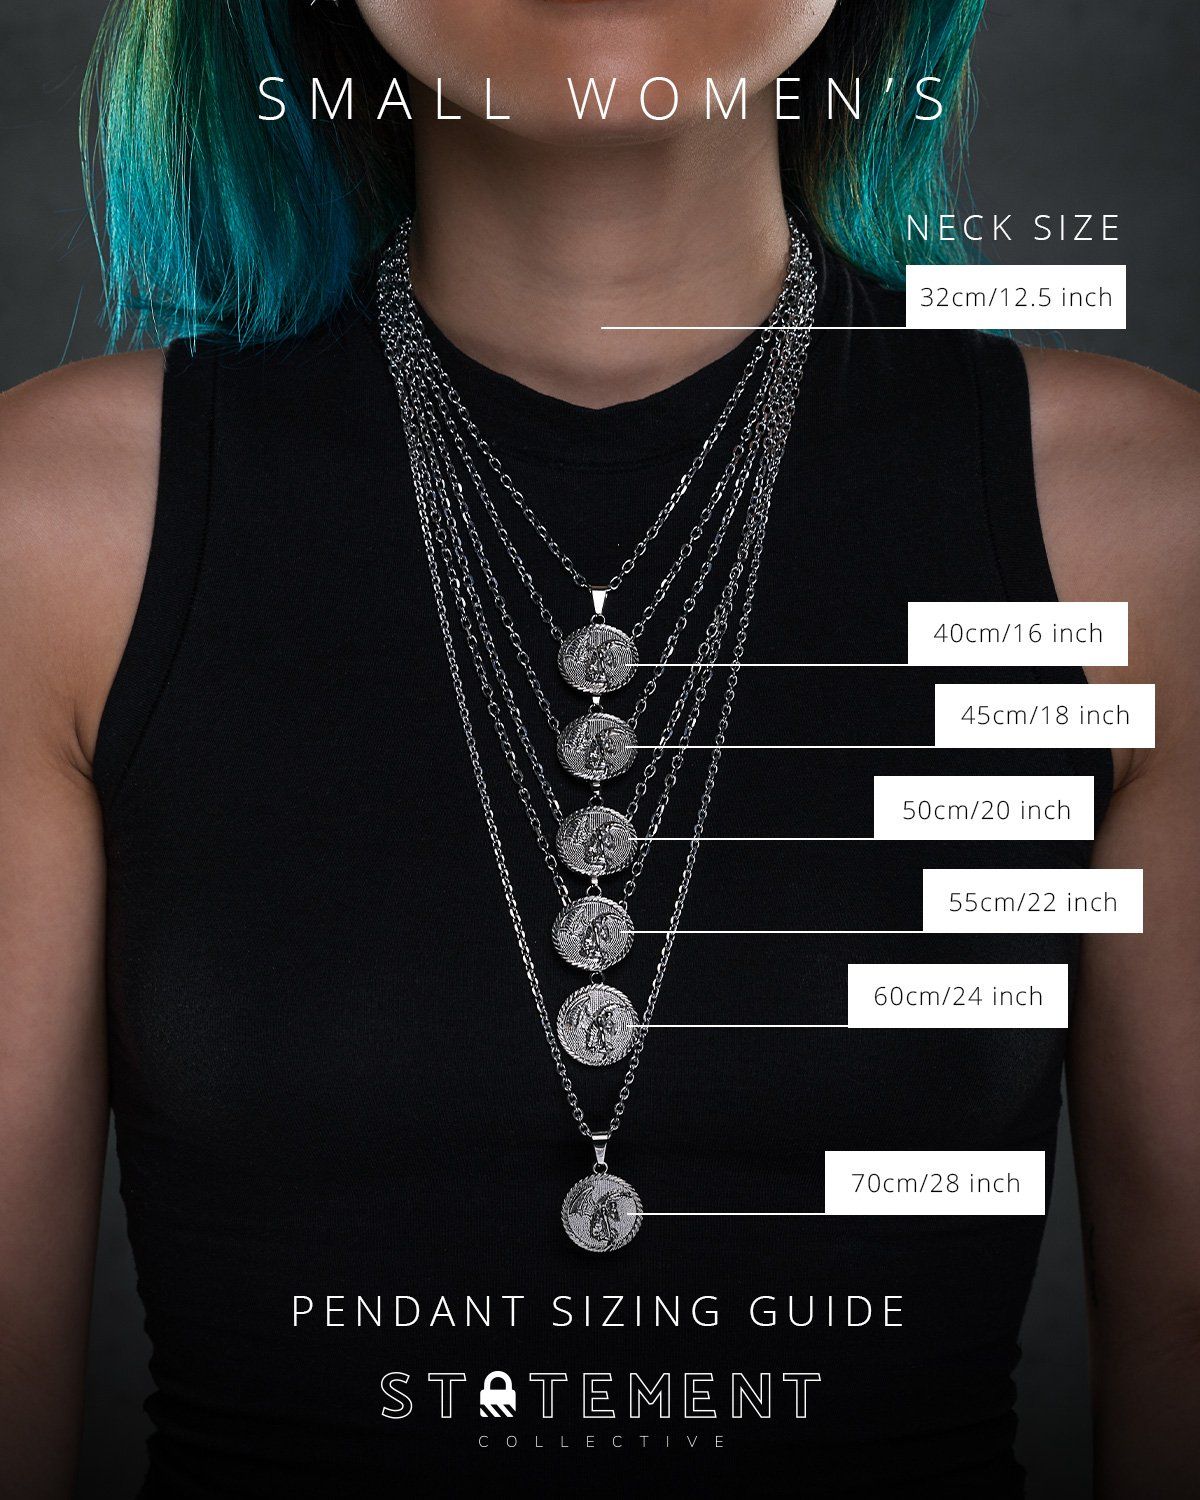 Small Womens sizing guide for pendant necklaces